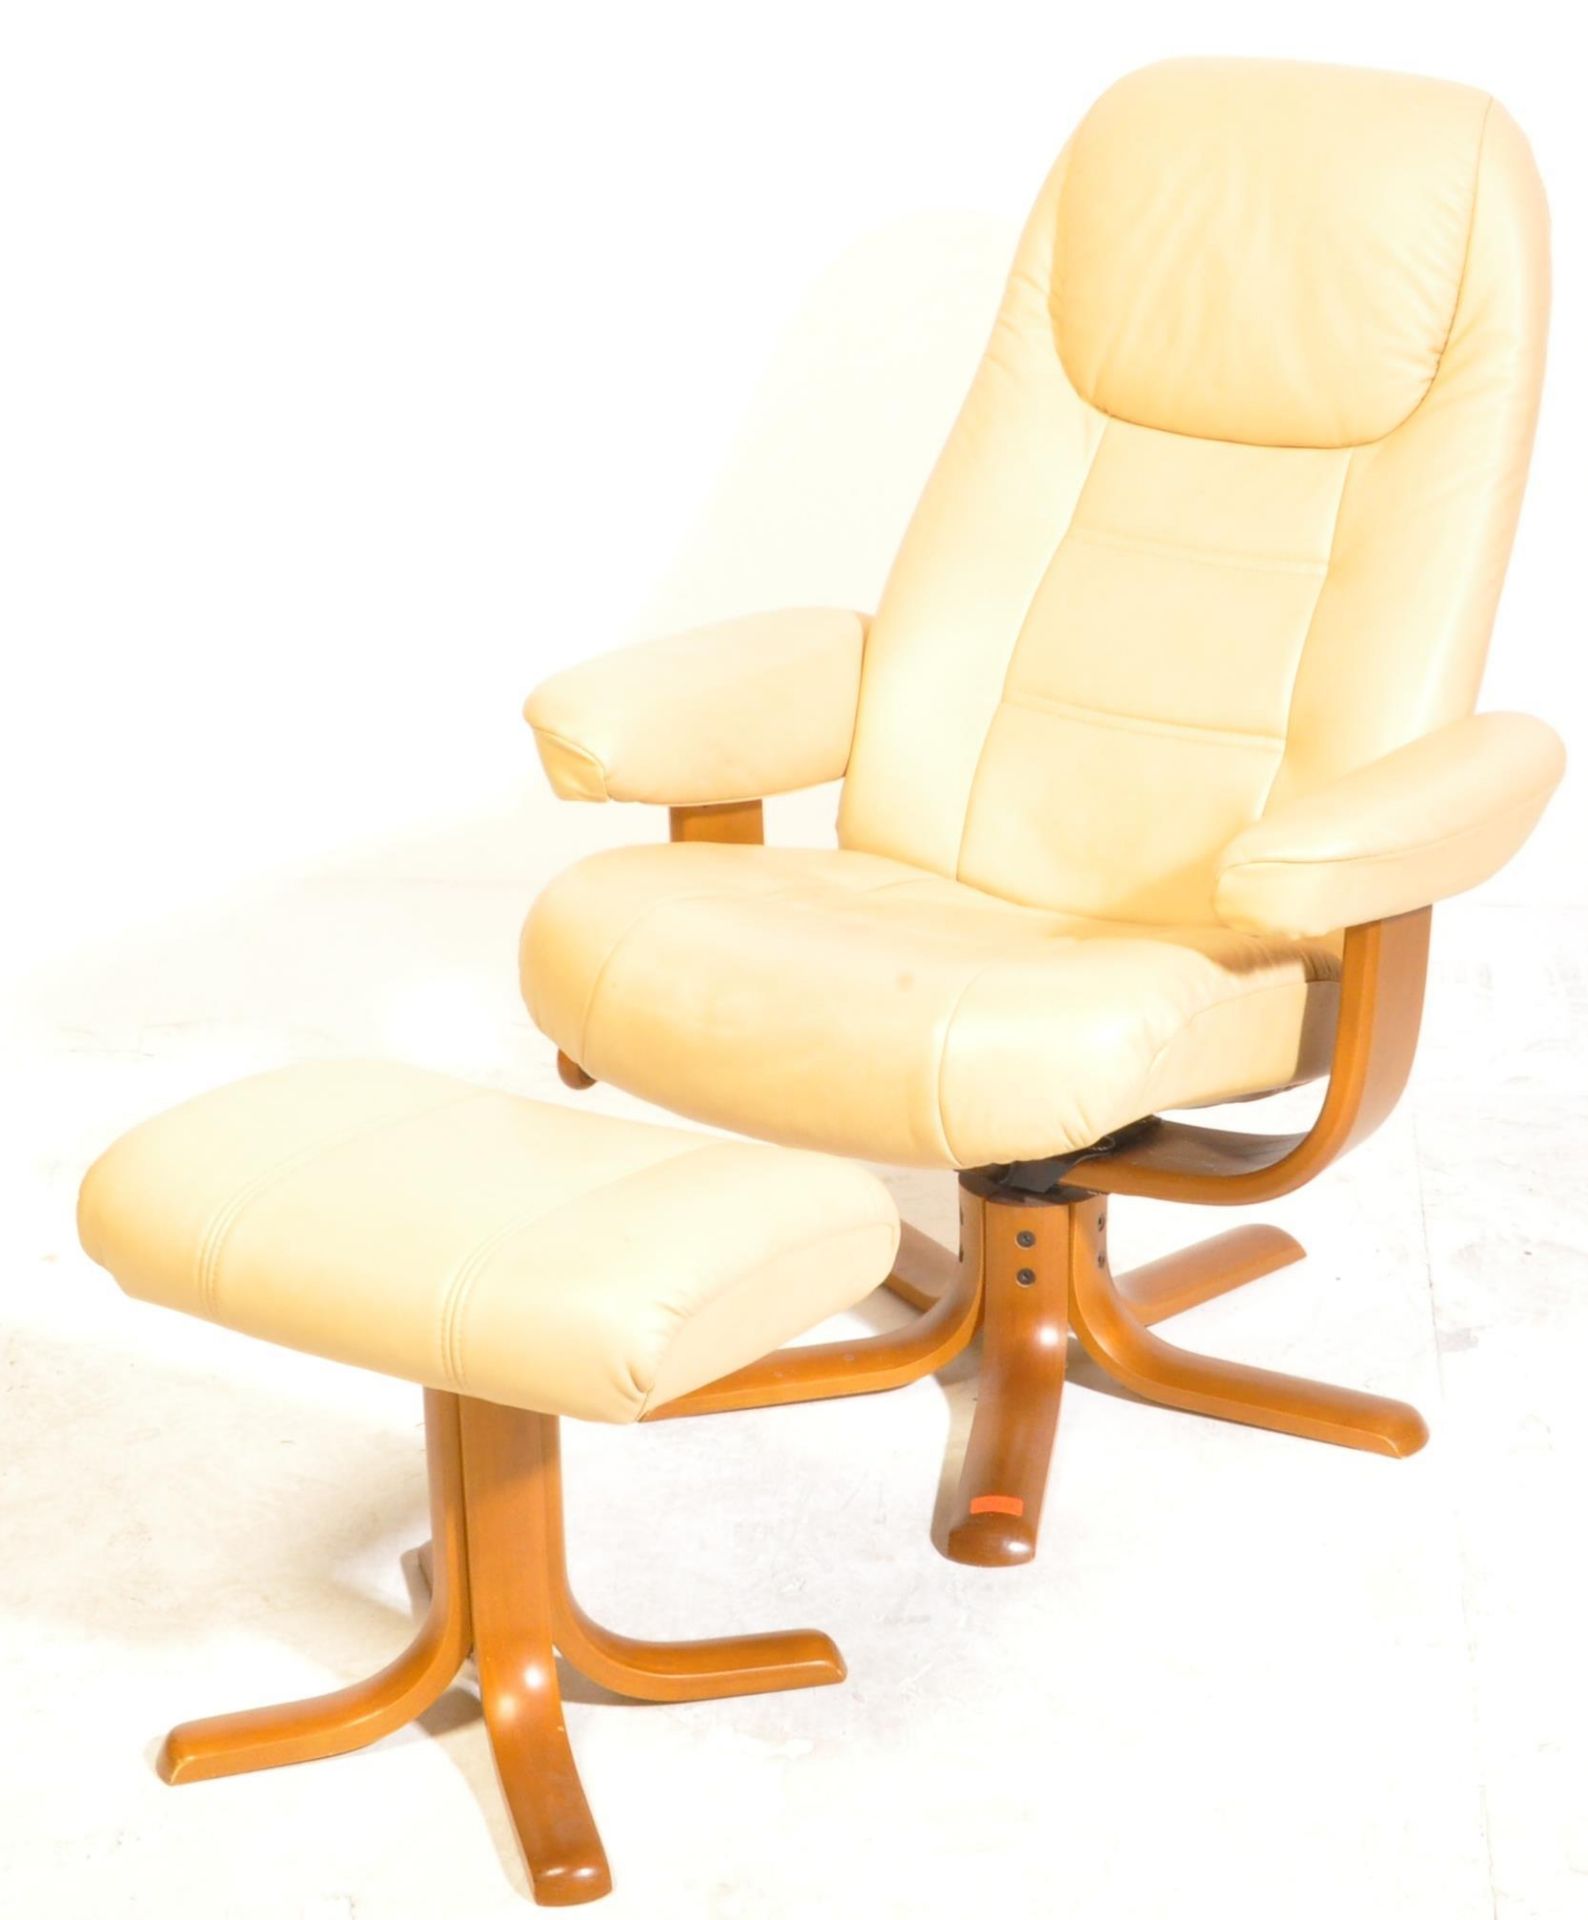 EKORNES STRESSLESS STYLE LEATHER ARMCHAIR & STOOL - Image 2 of 9